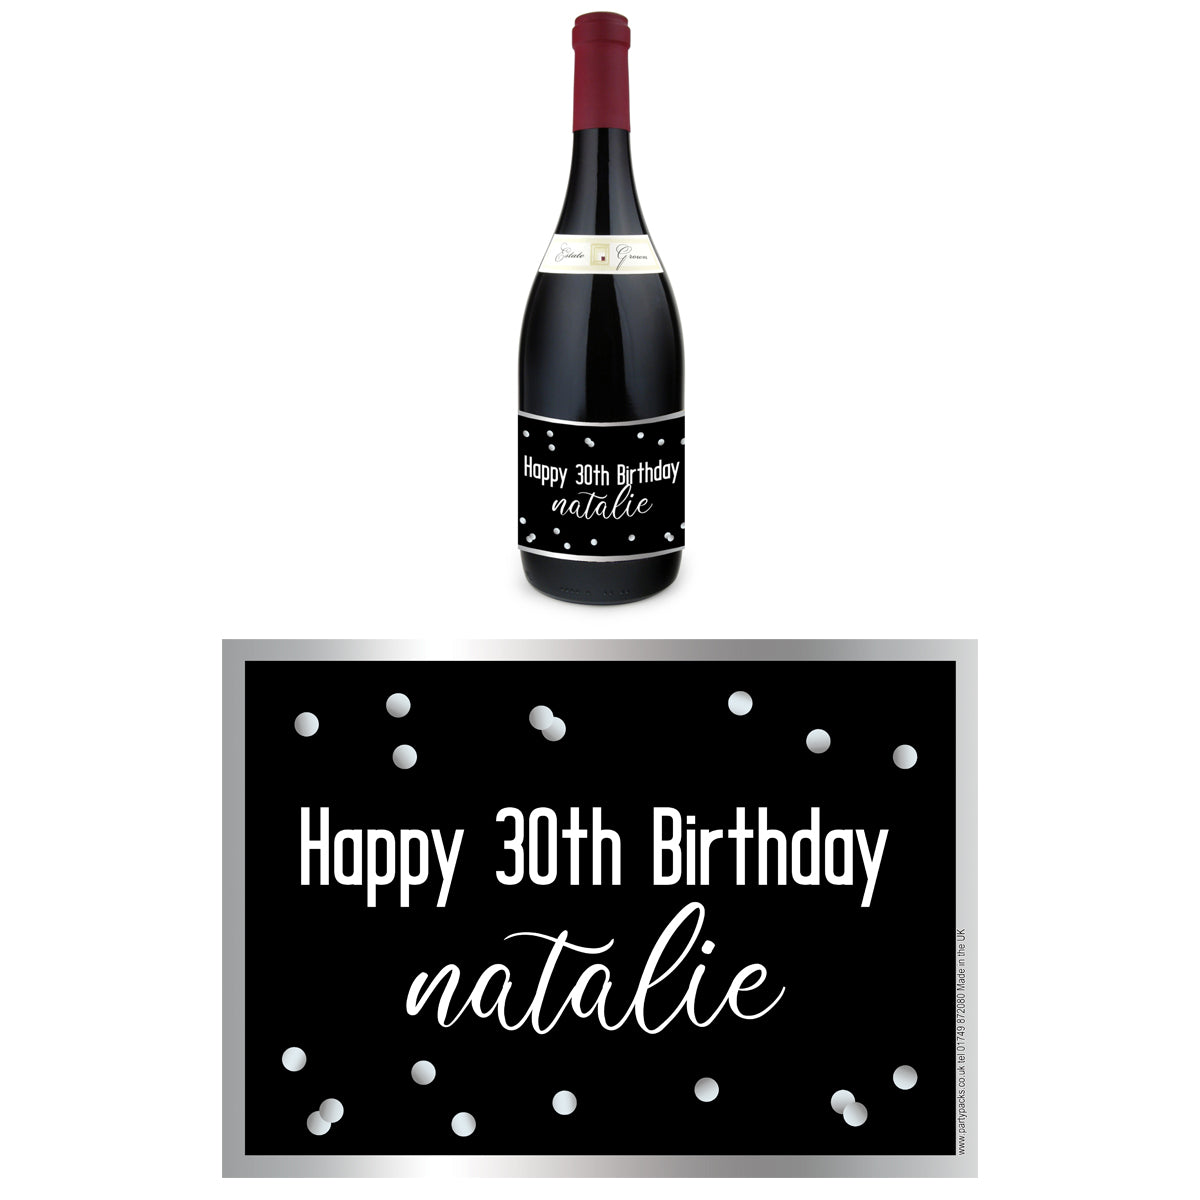 Personalised Wine Bottle Labels - Glitz Black & Silver - Pack of 4